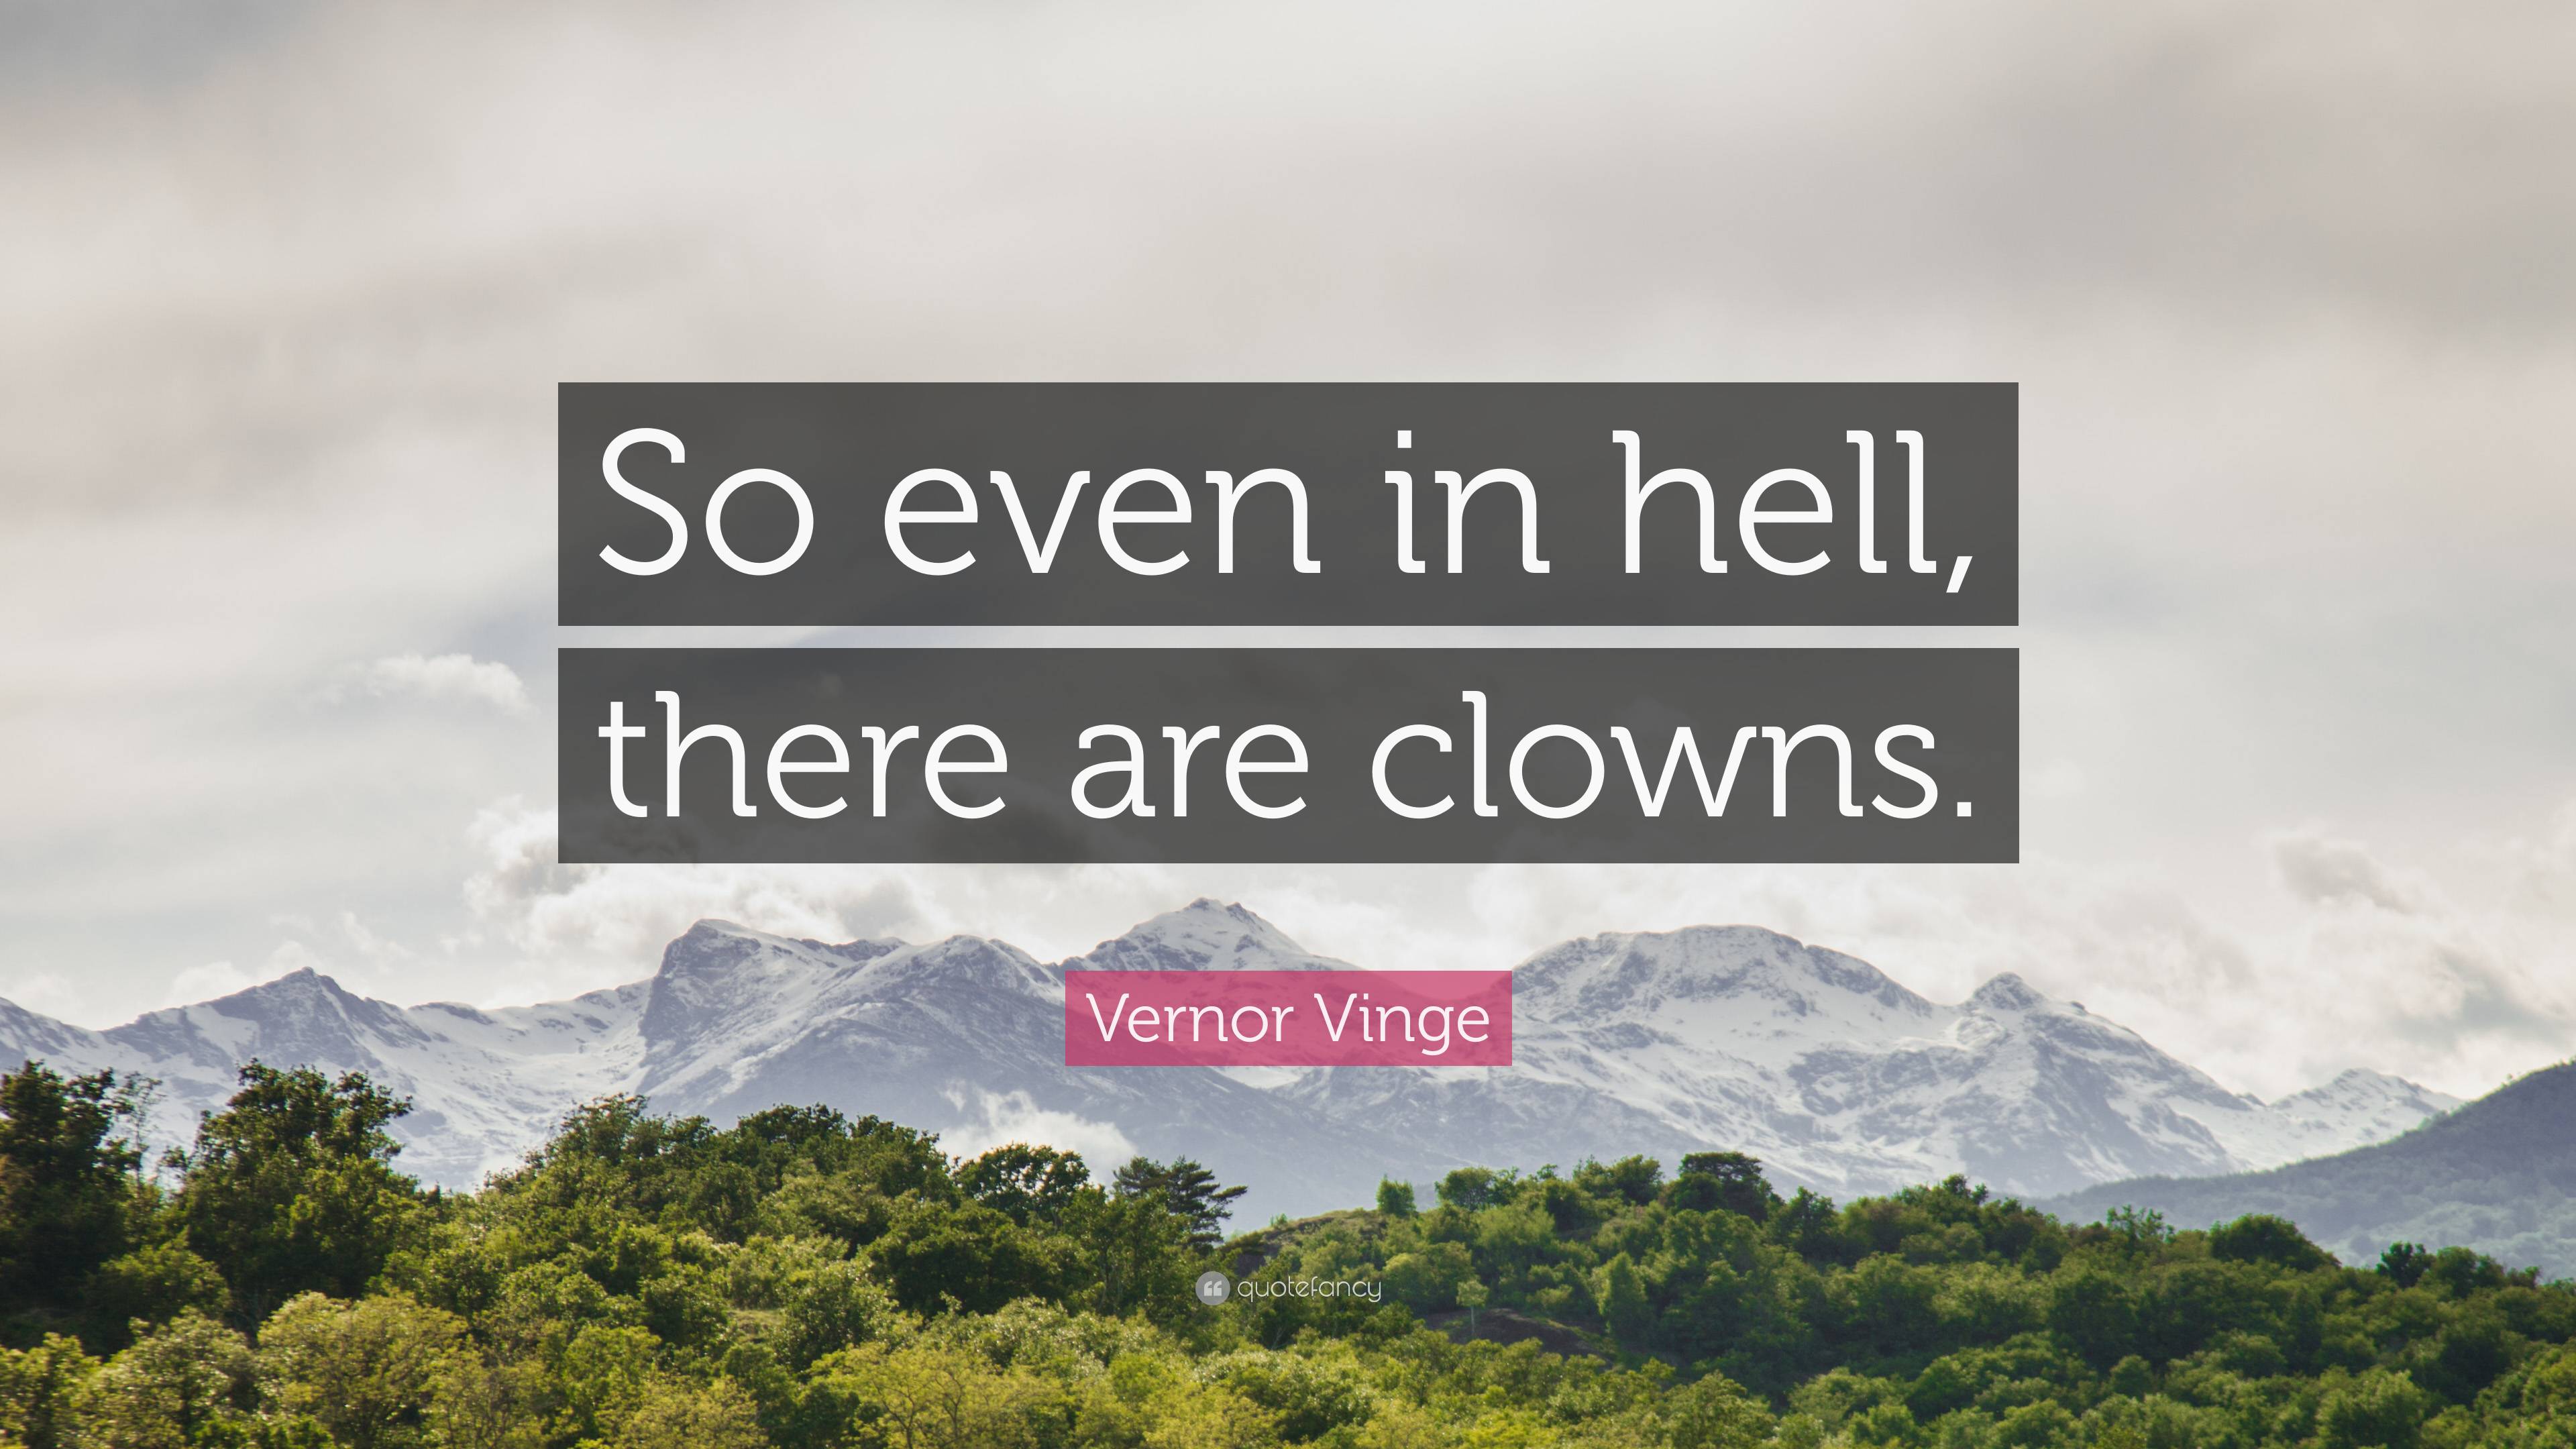 https://quotefancy.com/media/wallpaper/3840x2160/7462622-Vernor-Vinge-Quote-So-even-in-hell-there-are-clowns.jpg